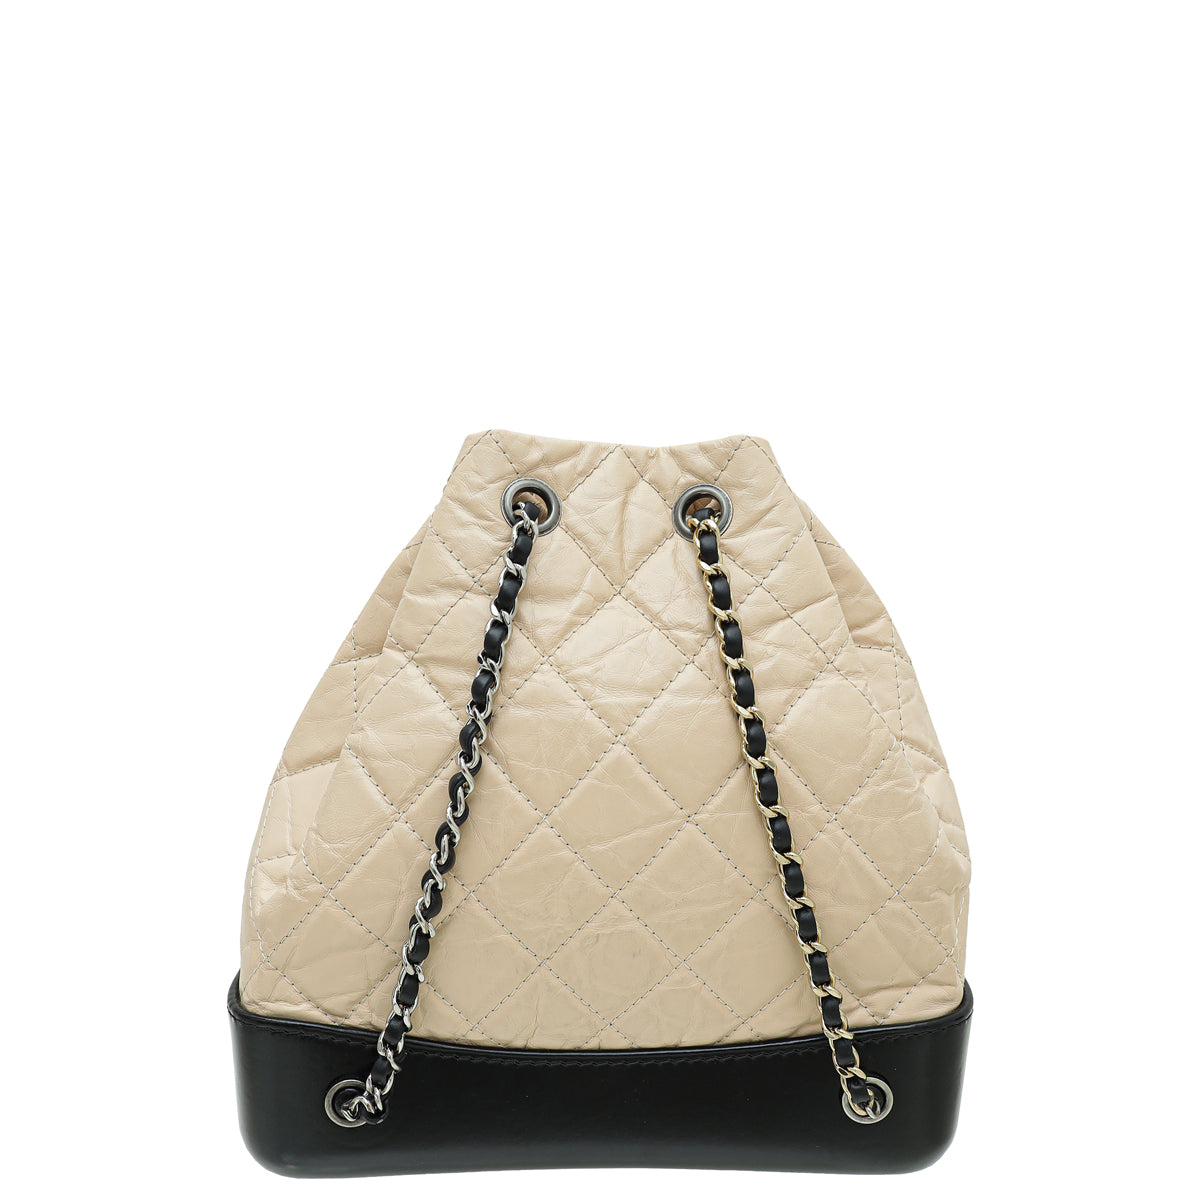 Chanel Bicolor CC Gabrielle Aged Small Backpack Bag